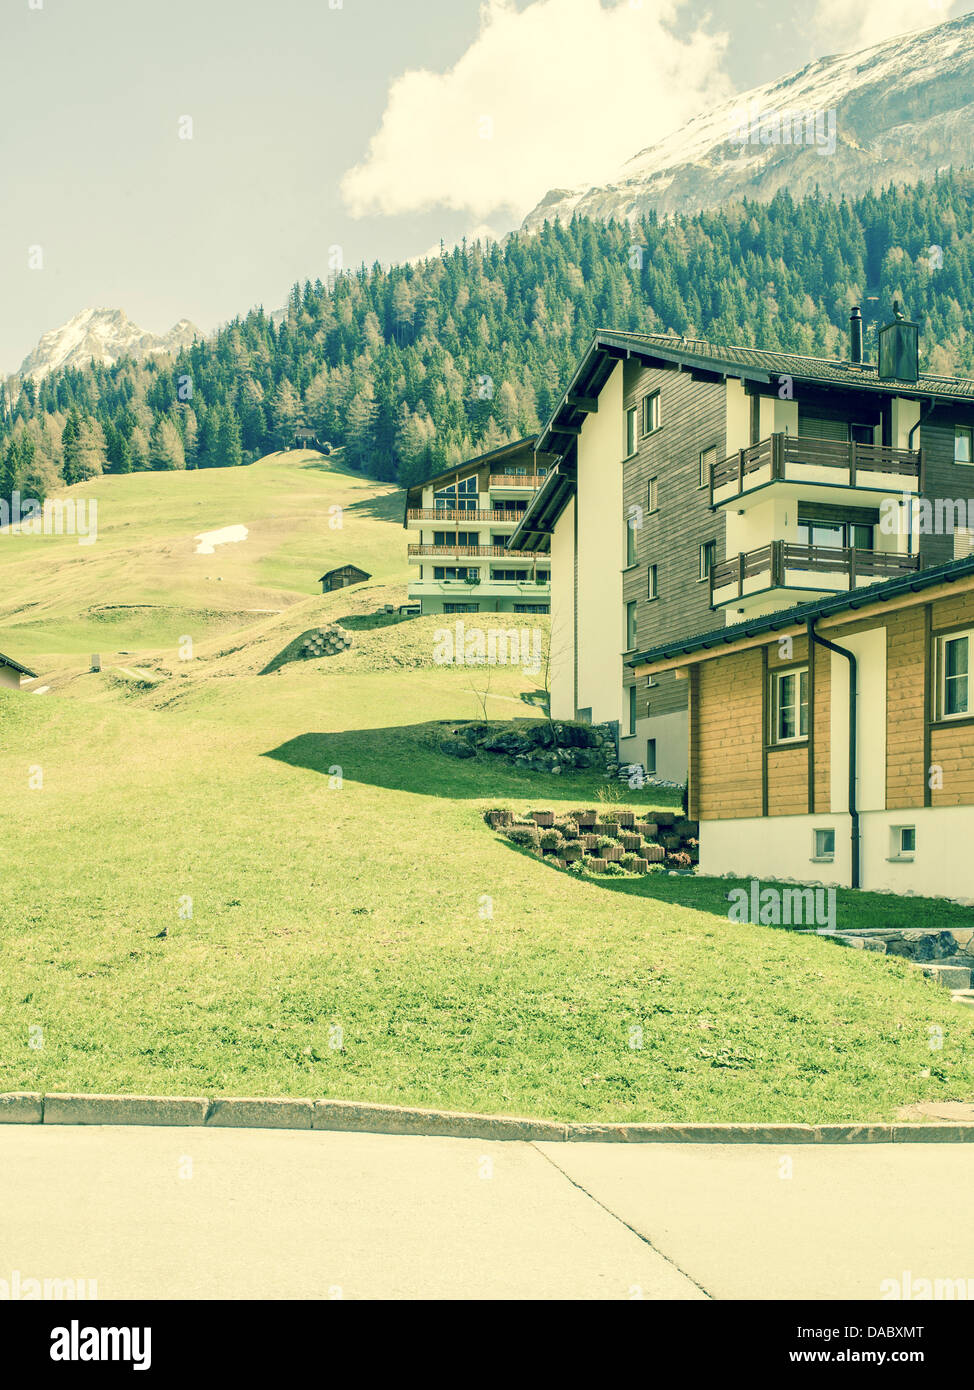 Chalets in Swiss Mountain town Stock Photo